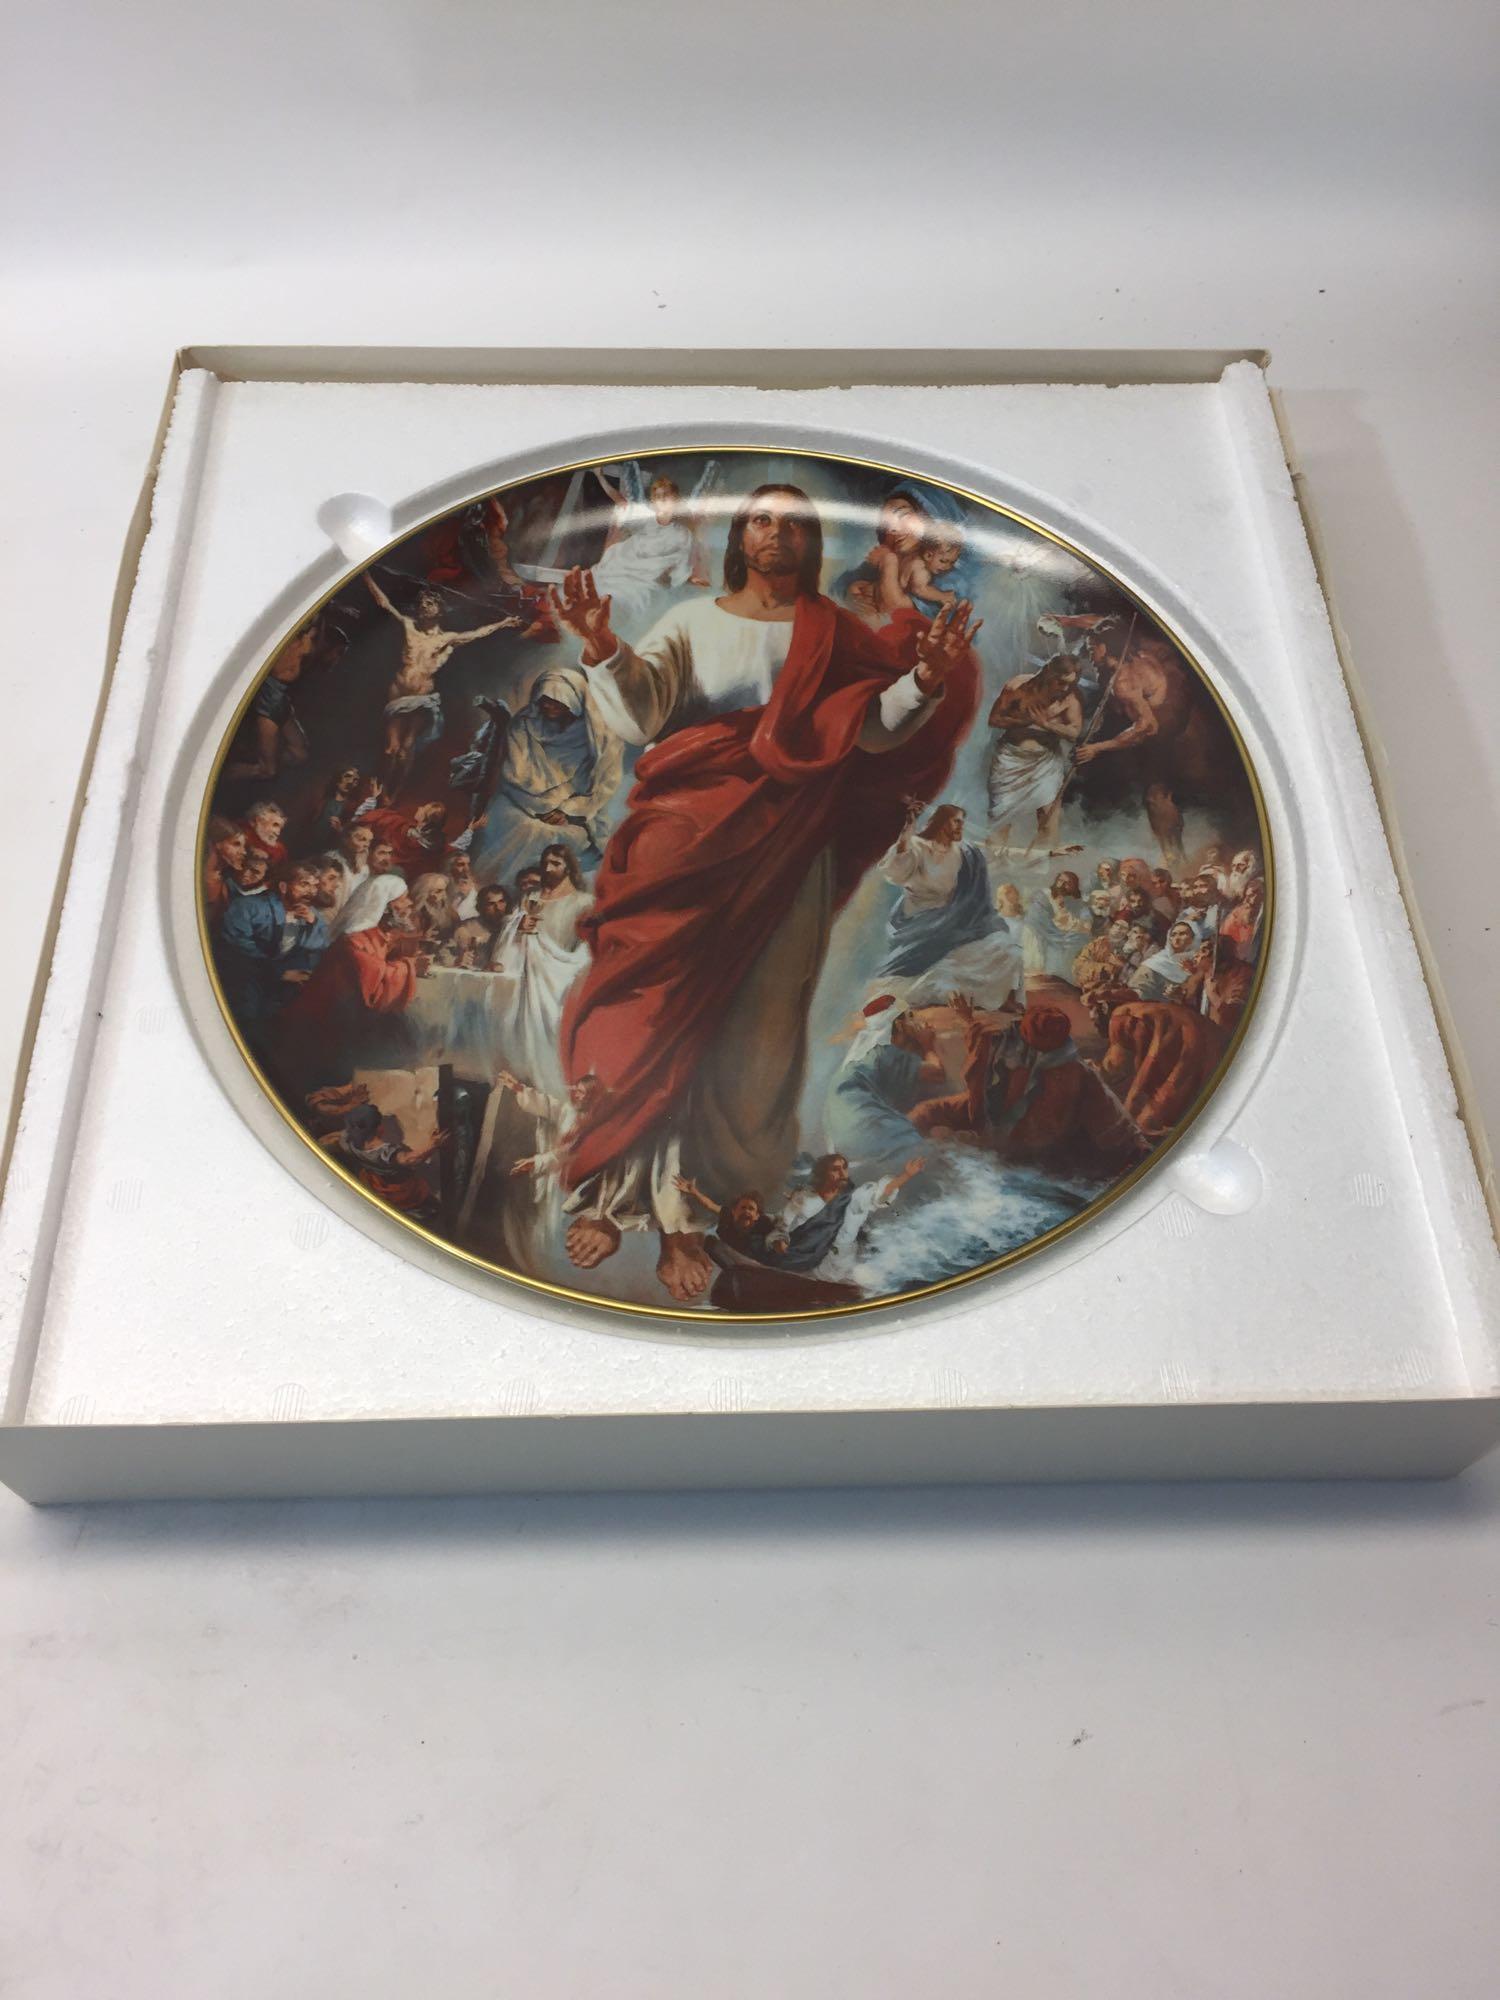 Limited Edition 12in Ceramic Plate - The Life of Christ by Stephan Juharos